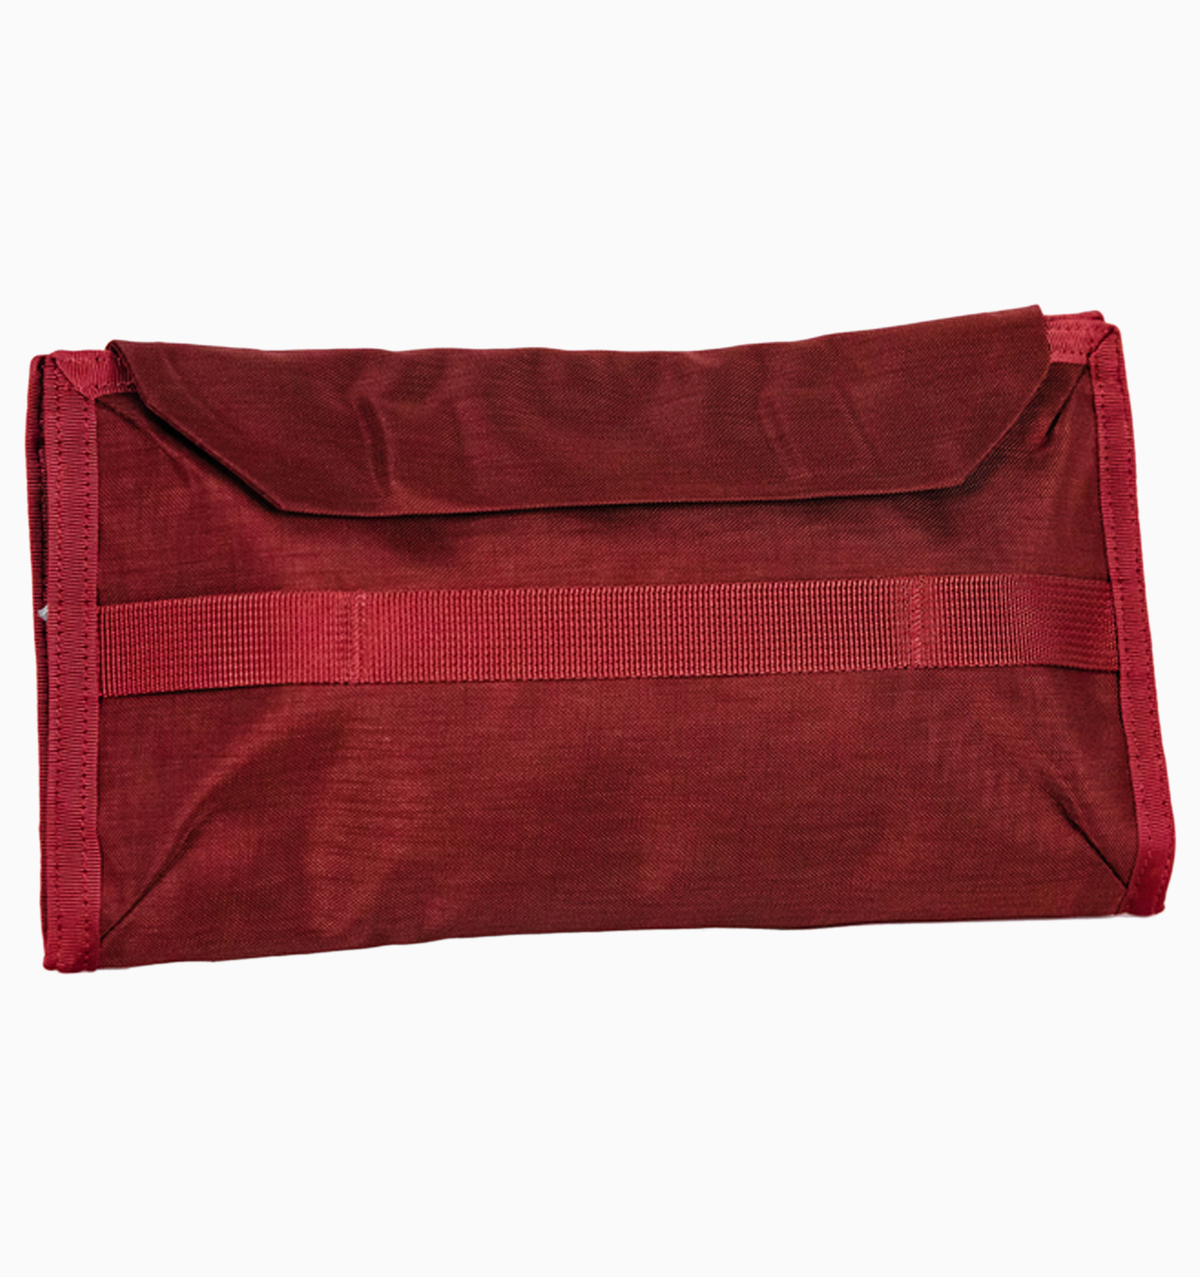 Evergoods Civic Access Pouch 1L - Burgundy